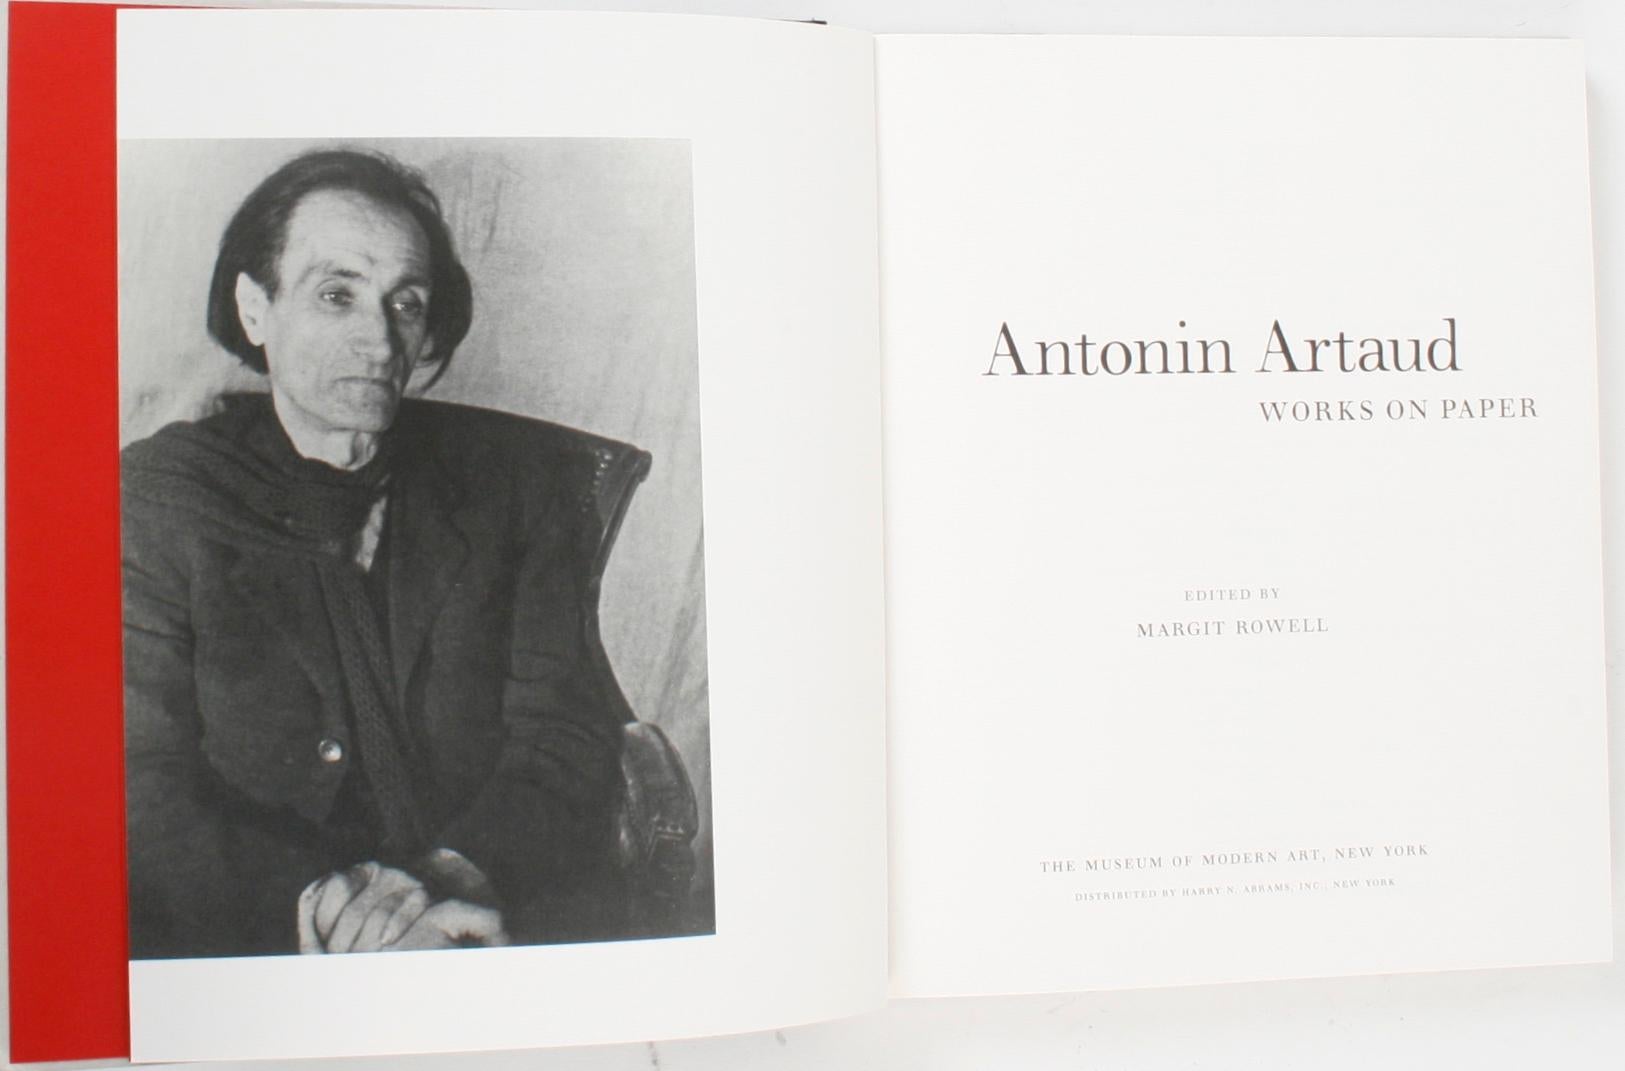 Antonin Artaud, Works on Paper. New York: The Museum of Modern Art, 1996. 1st Ed hardcover with dust jacket. 167 pp. A book published in conjunction with the MOMA exhibition which ran from October 3, 1996 to January 7, 1997. Antoine Marie Joseph